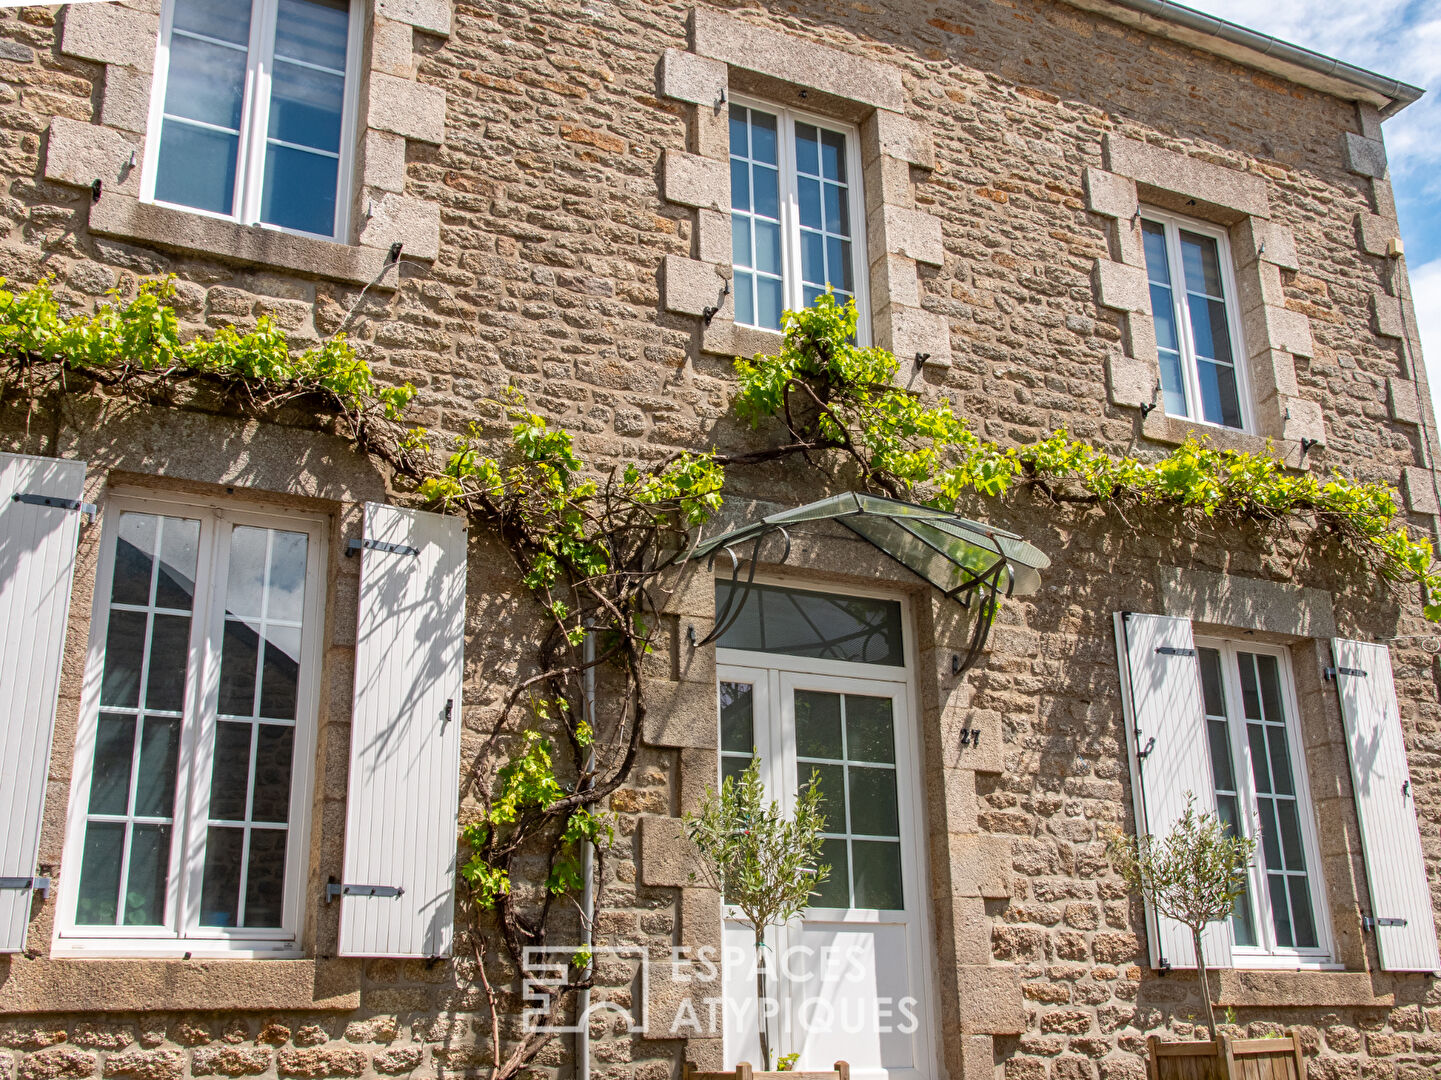 Beautiful Dinan house restored with refinement and elegance